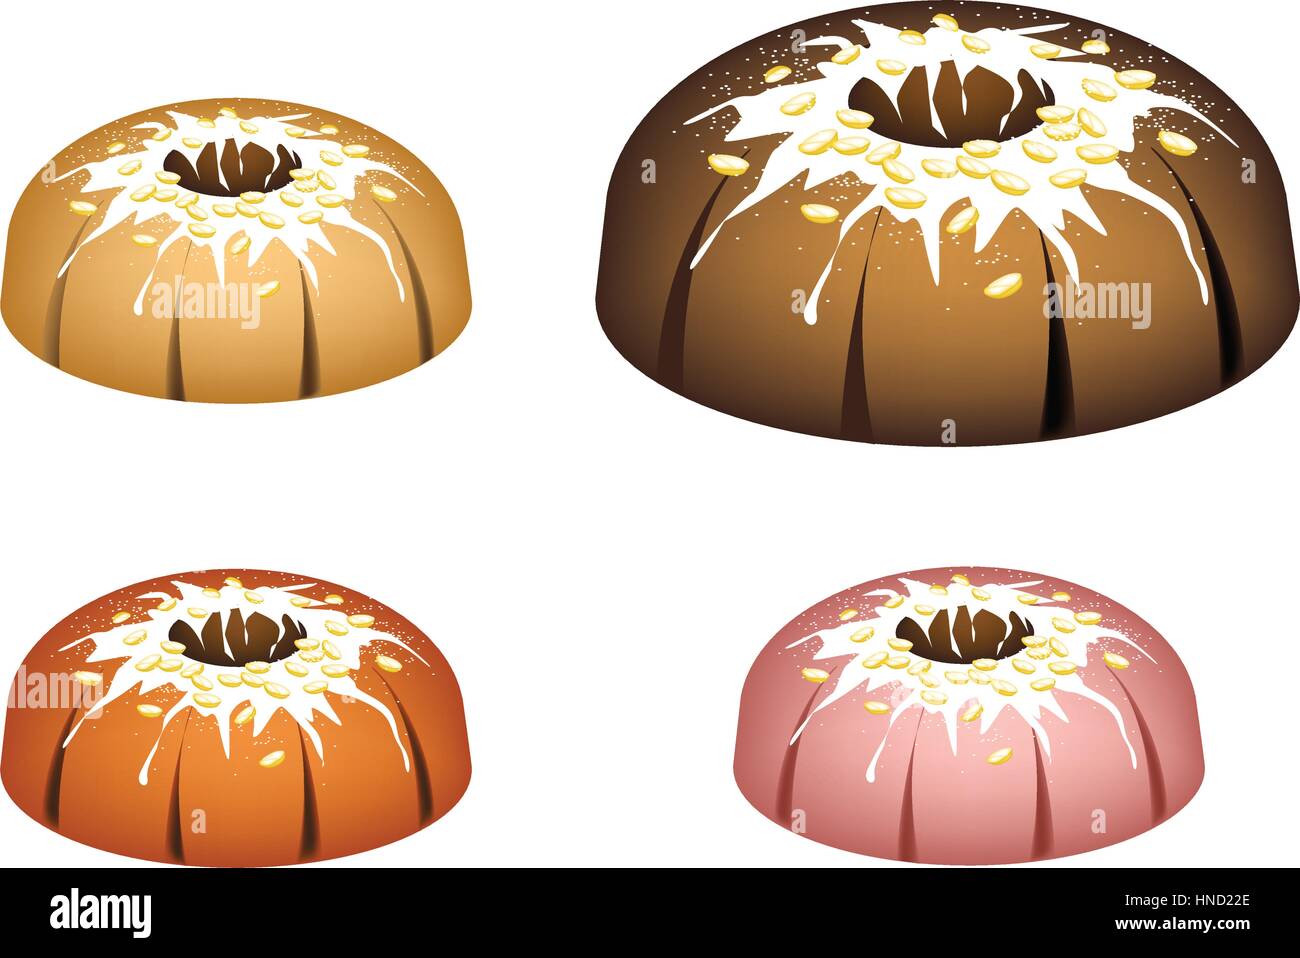 Illustration Set of Bundt Cake or Traditional Big Round Cake with Hole Inside, Mirror Glaze Coating and Chocolate Sprinkles for Holiday Dessert Isolat Stock Vector